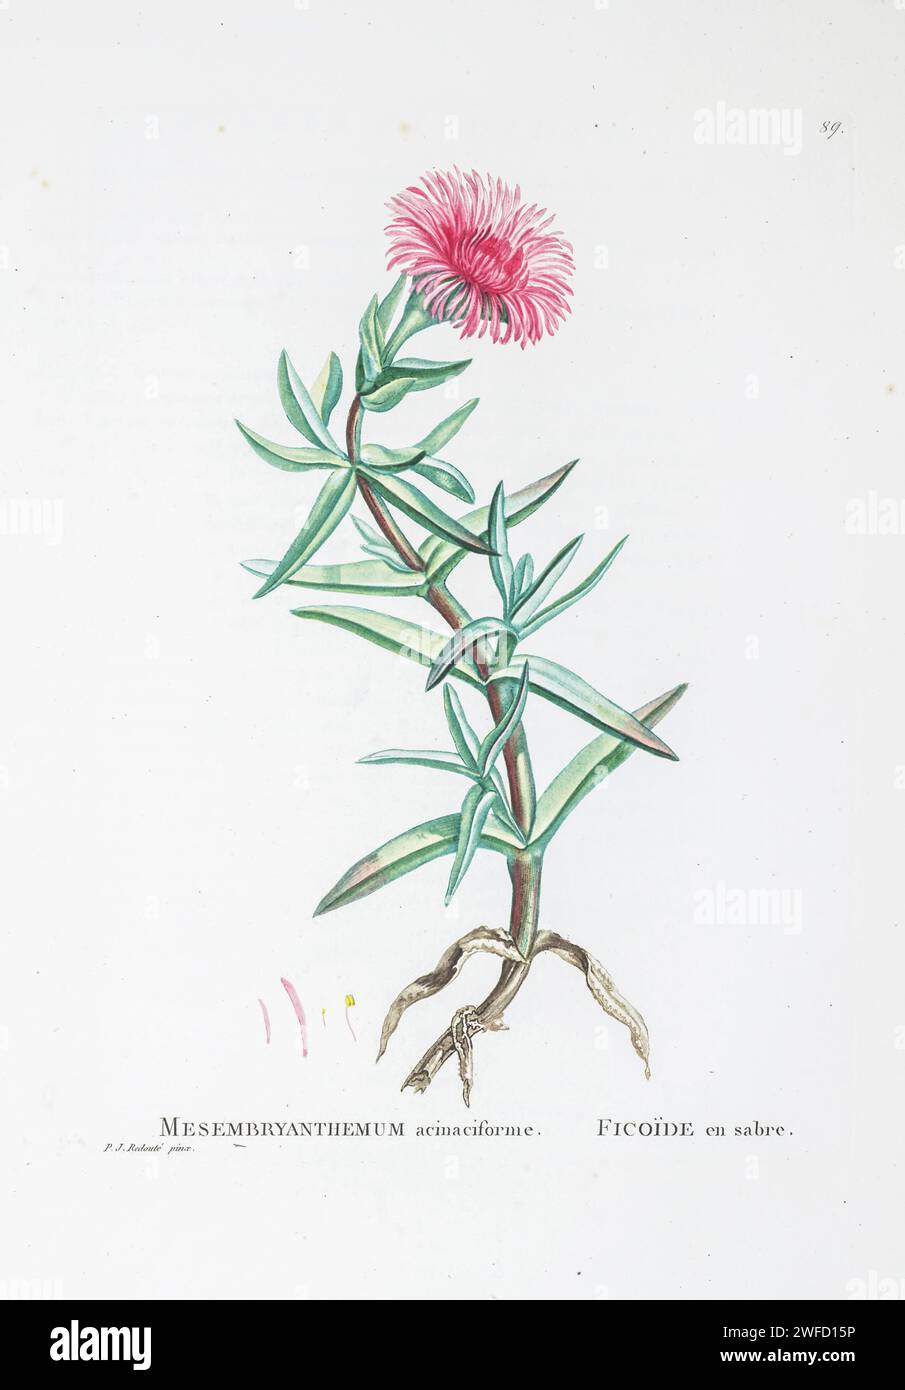 Semnanthe lacera (Haw.) INE: Br. Here As Mesembryanthemum acinaciforme from History of Succulent Plants [Plantarum historia succulentarum / Histoire des plantes grasses] painted by Pierre-Joseph Redouté and described by Augustin Pyramus de Candolle 1799 Stock Photo